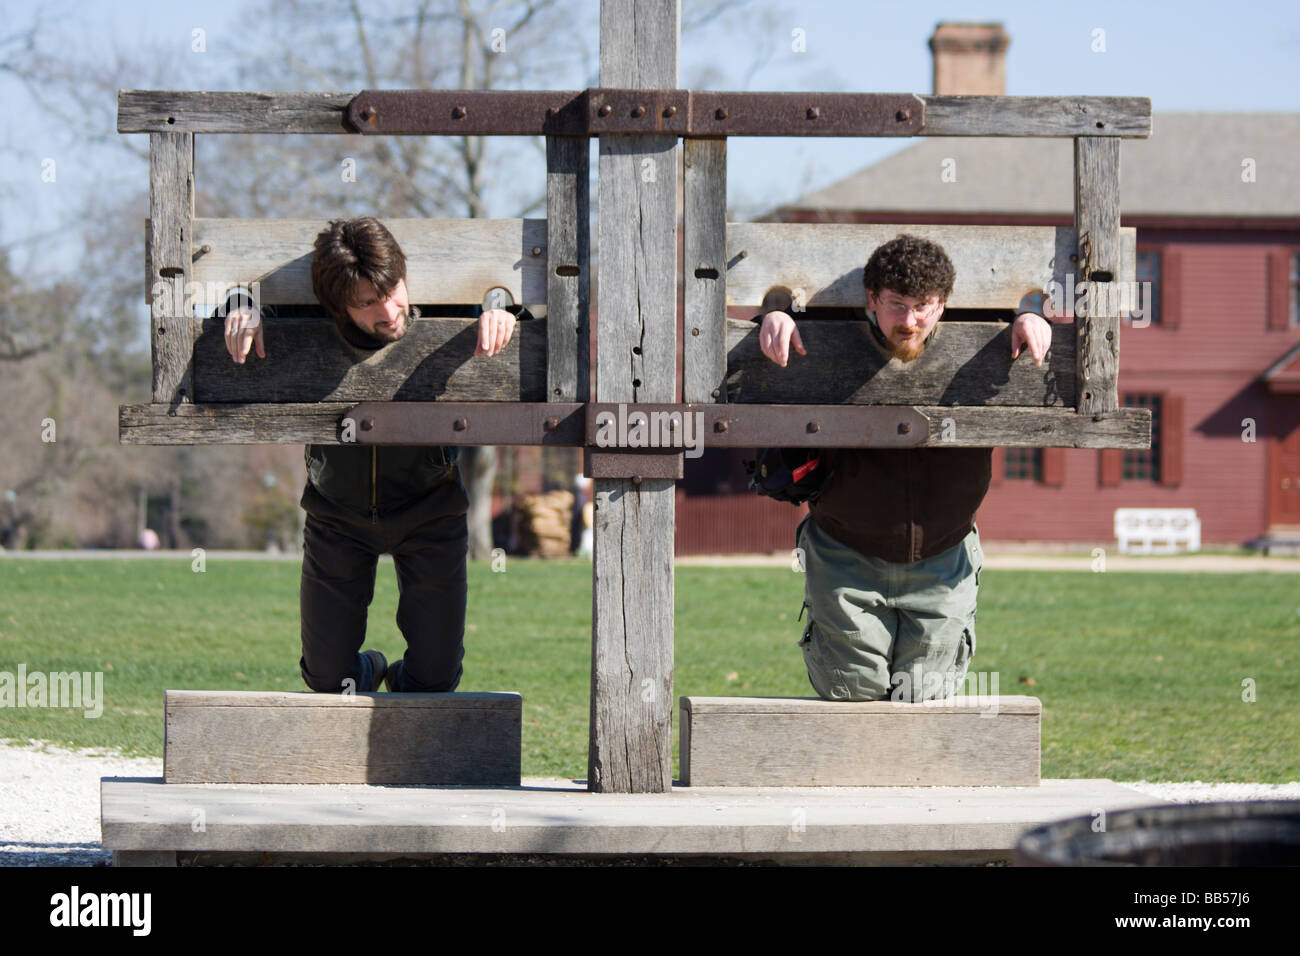 two-tourists-at-colonial-williamsburg-virginia-pretend-to-be-locked-BB57J6.jpg